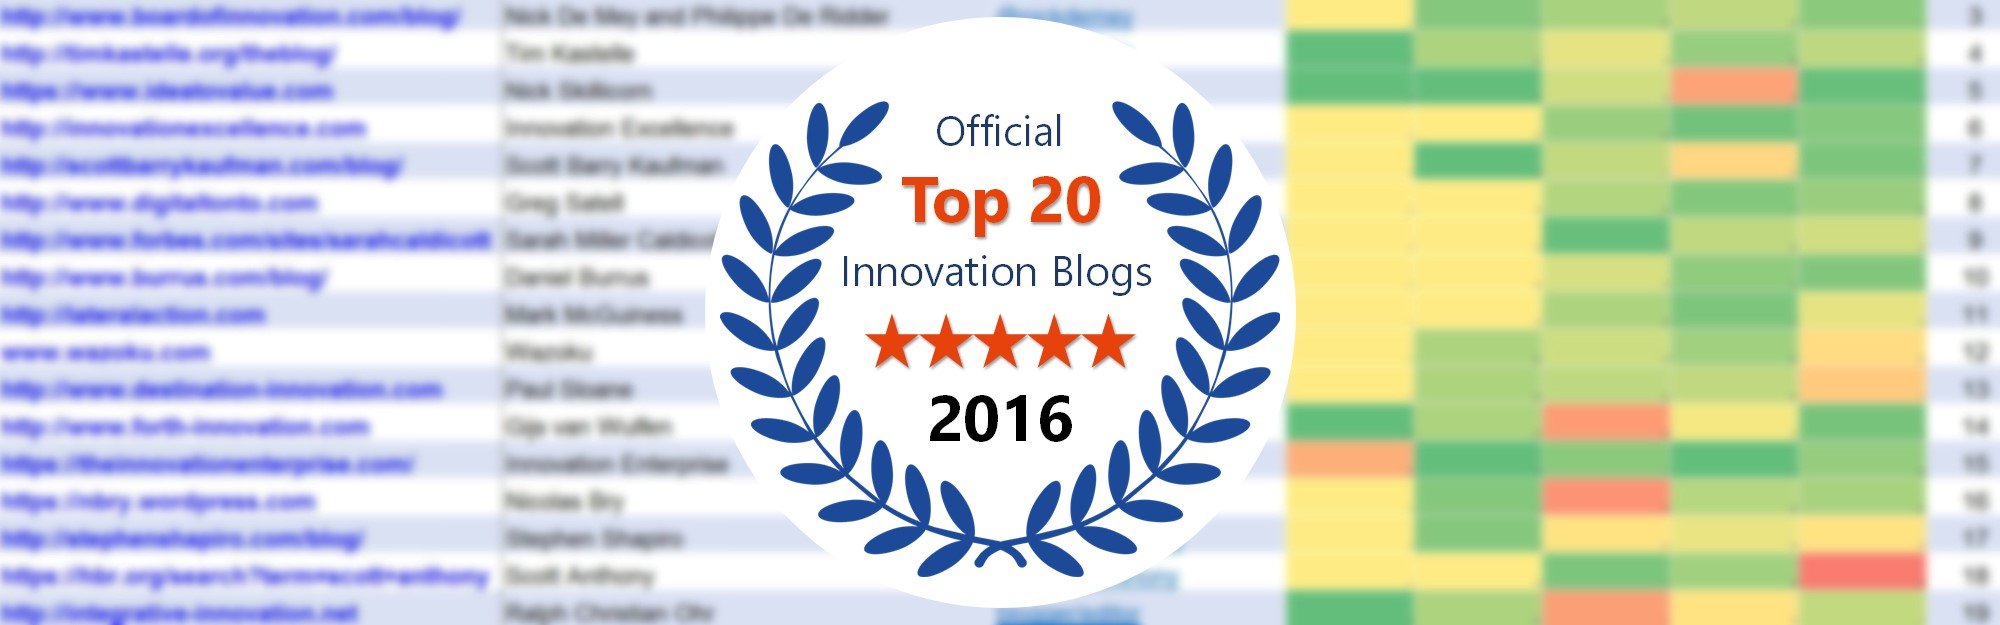 official top 20 innovation blogs 2016 background